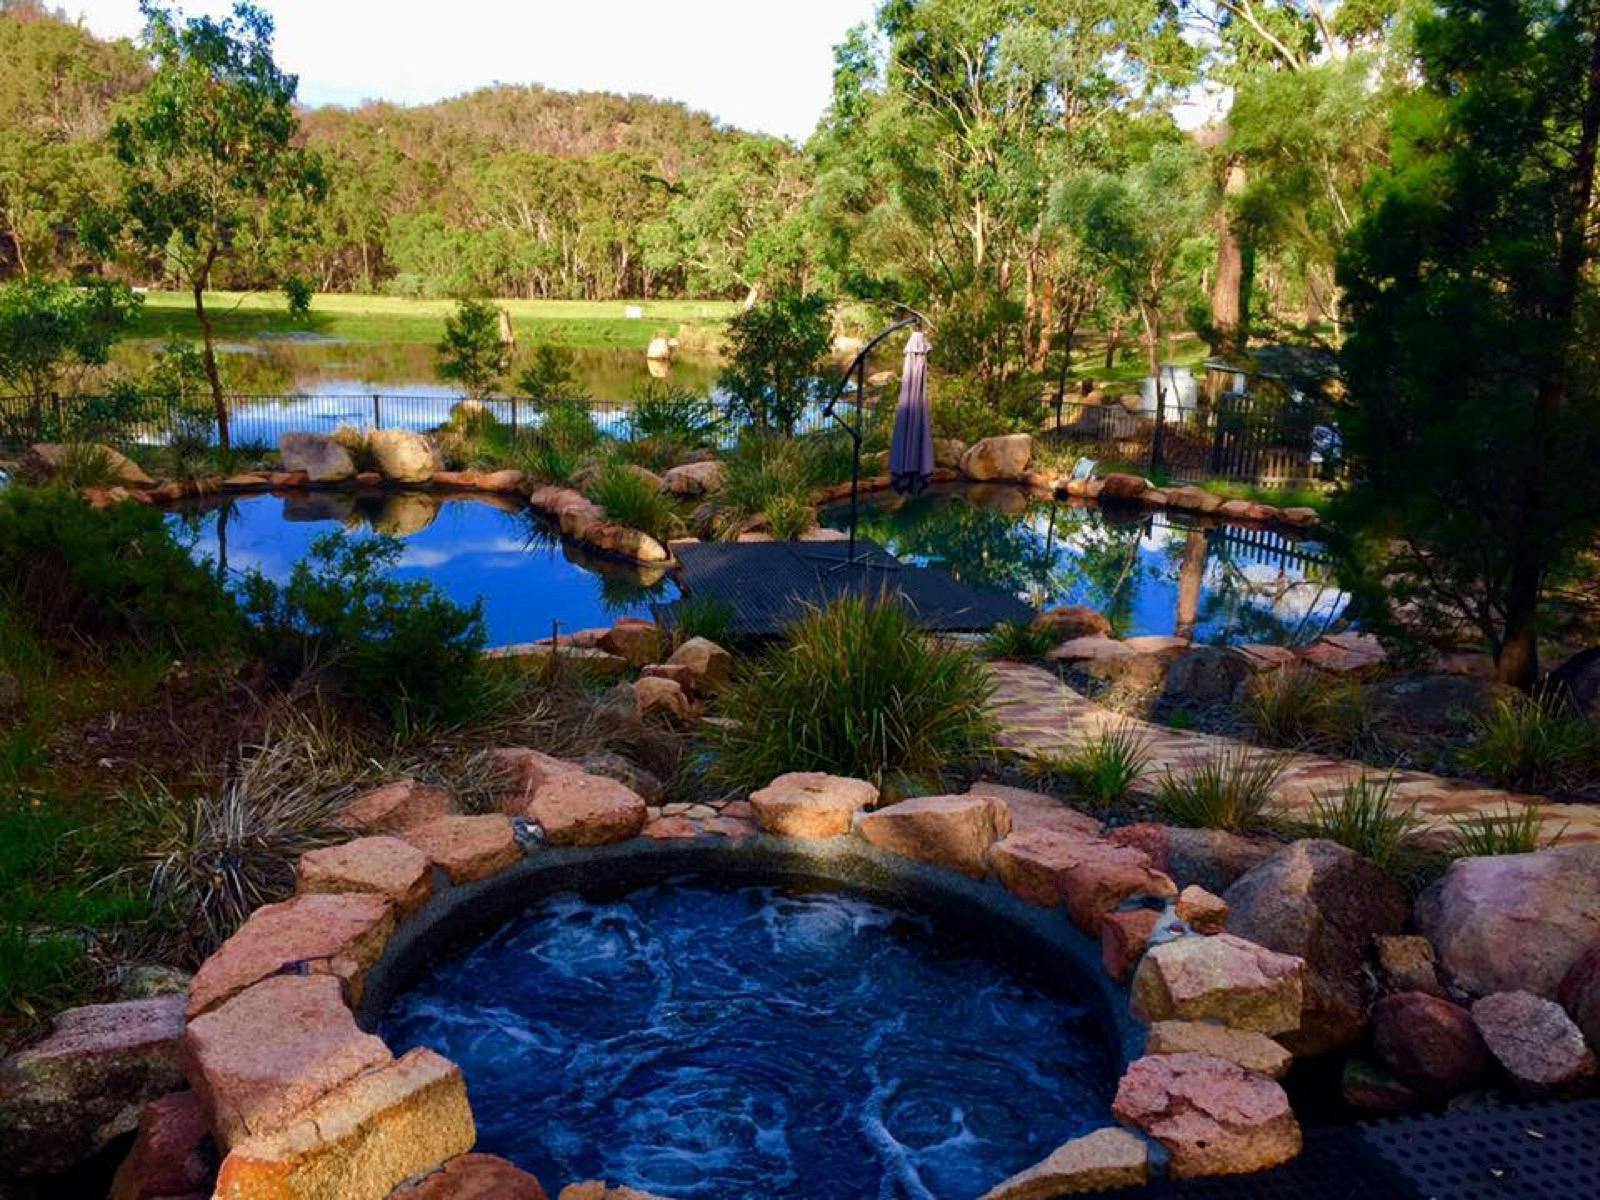 Outdoor plunge pools, Spa, walking trails